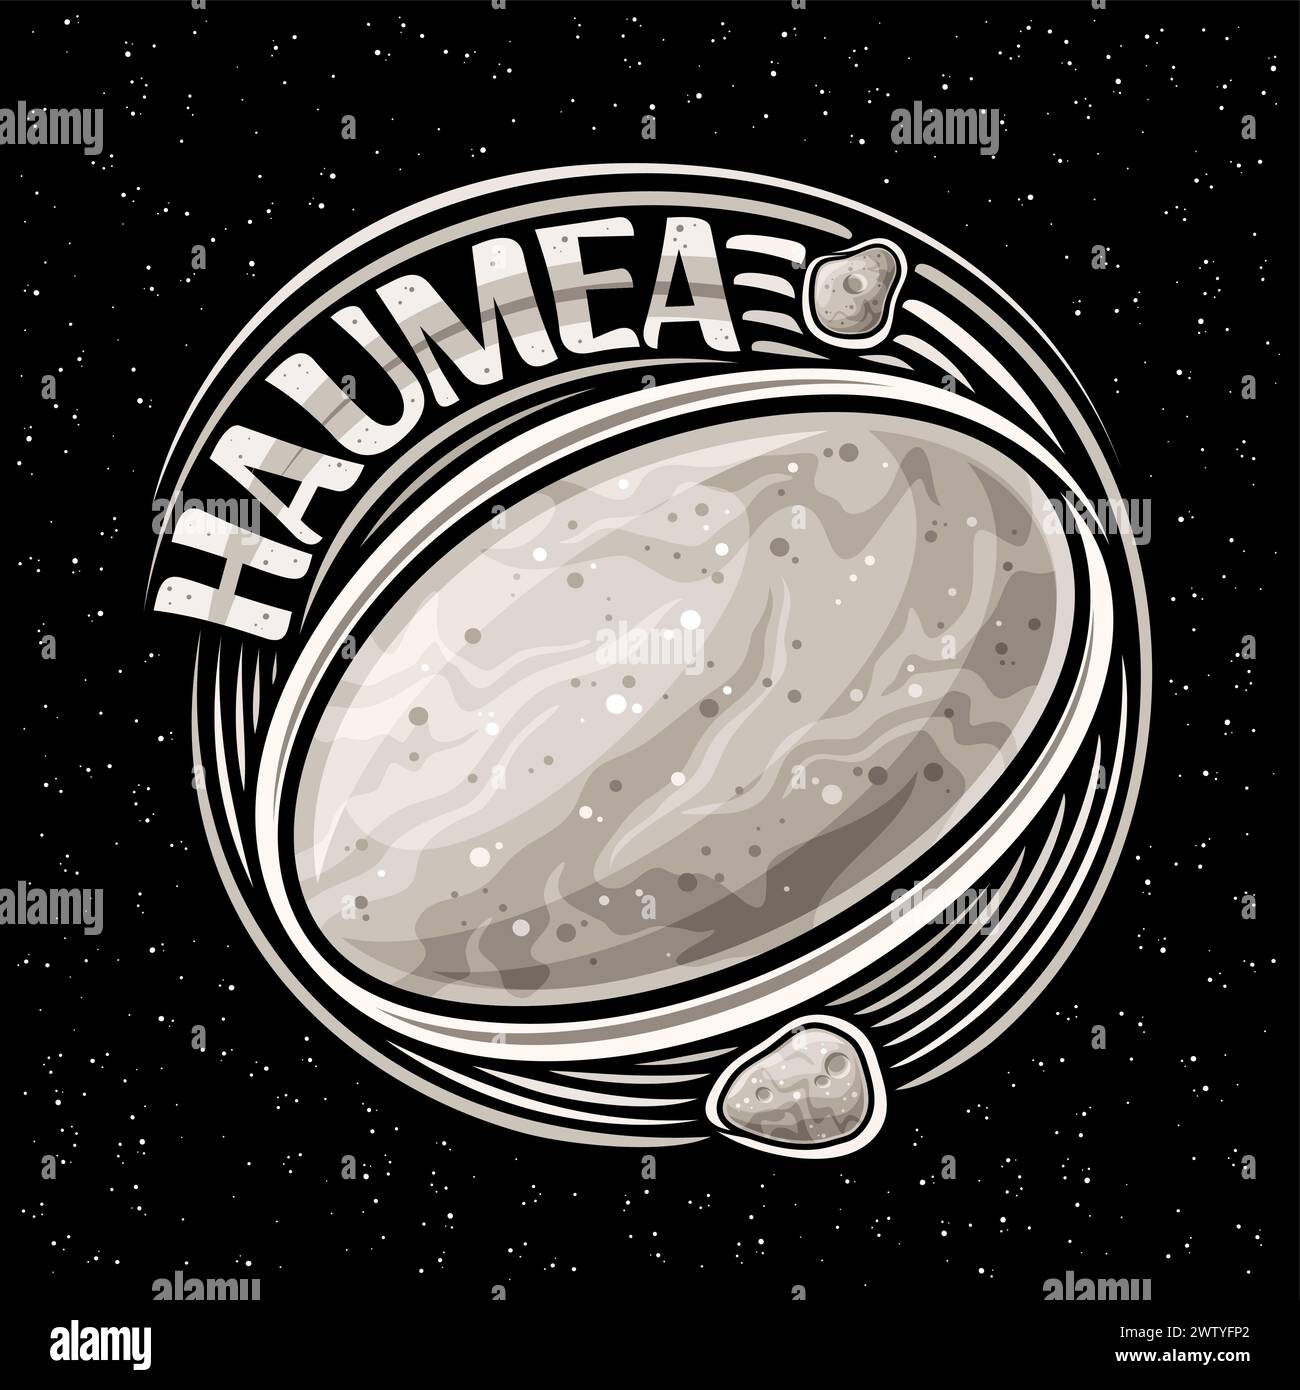 Vector logo for Dwarf Planet Haumea, decorative cosmo print with orbiting moons Hi'iaka and Namaka around planet, square space poster with unique lett Stock Vector